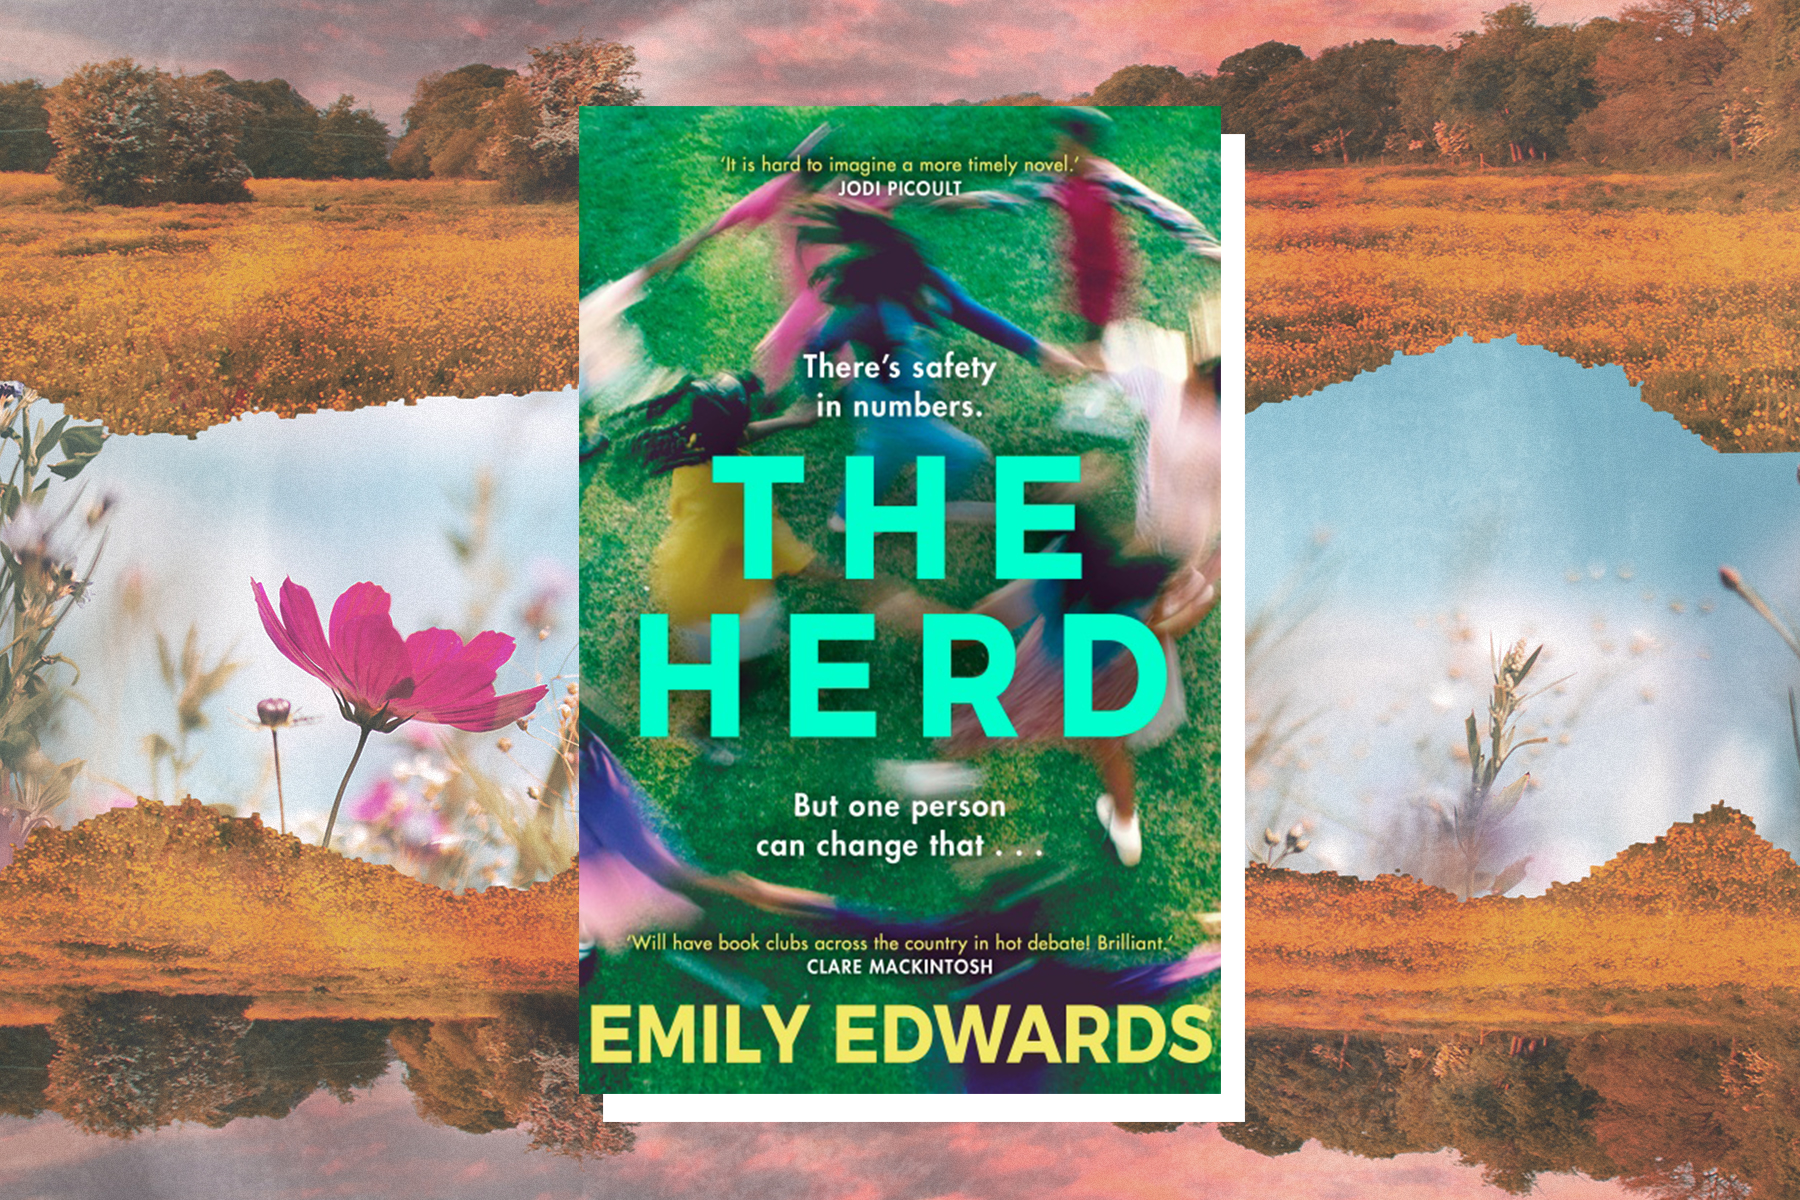 An image of the cover of the Herd against a collage backdrop of flowers